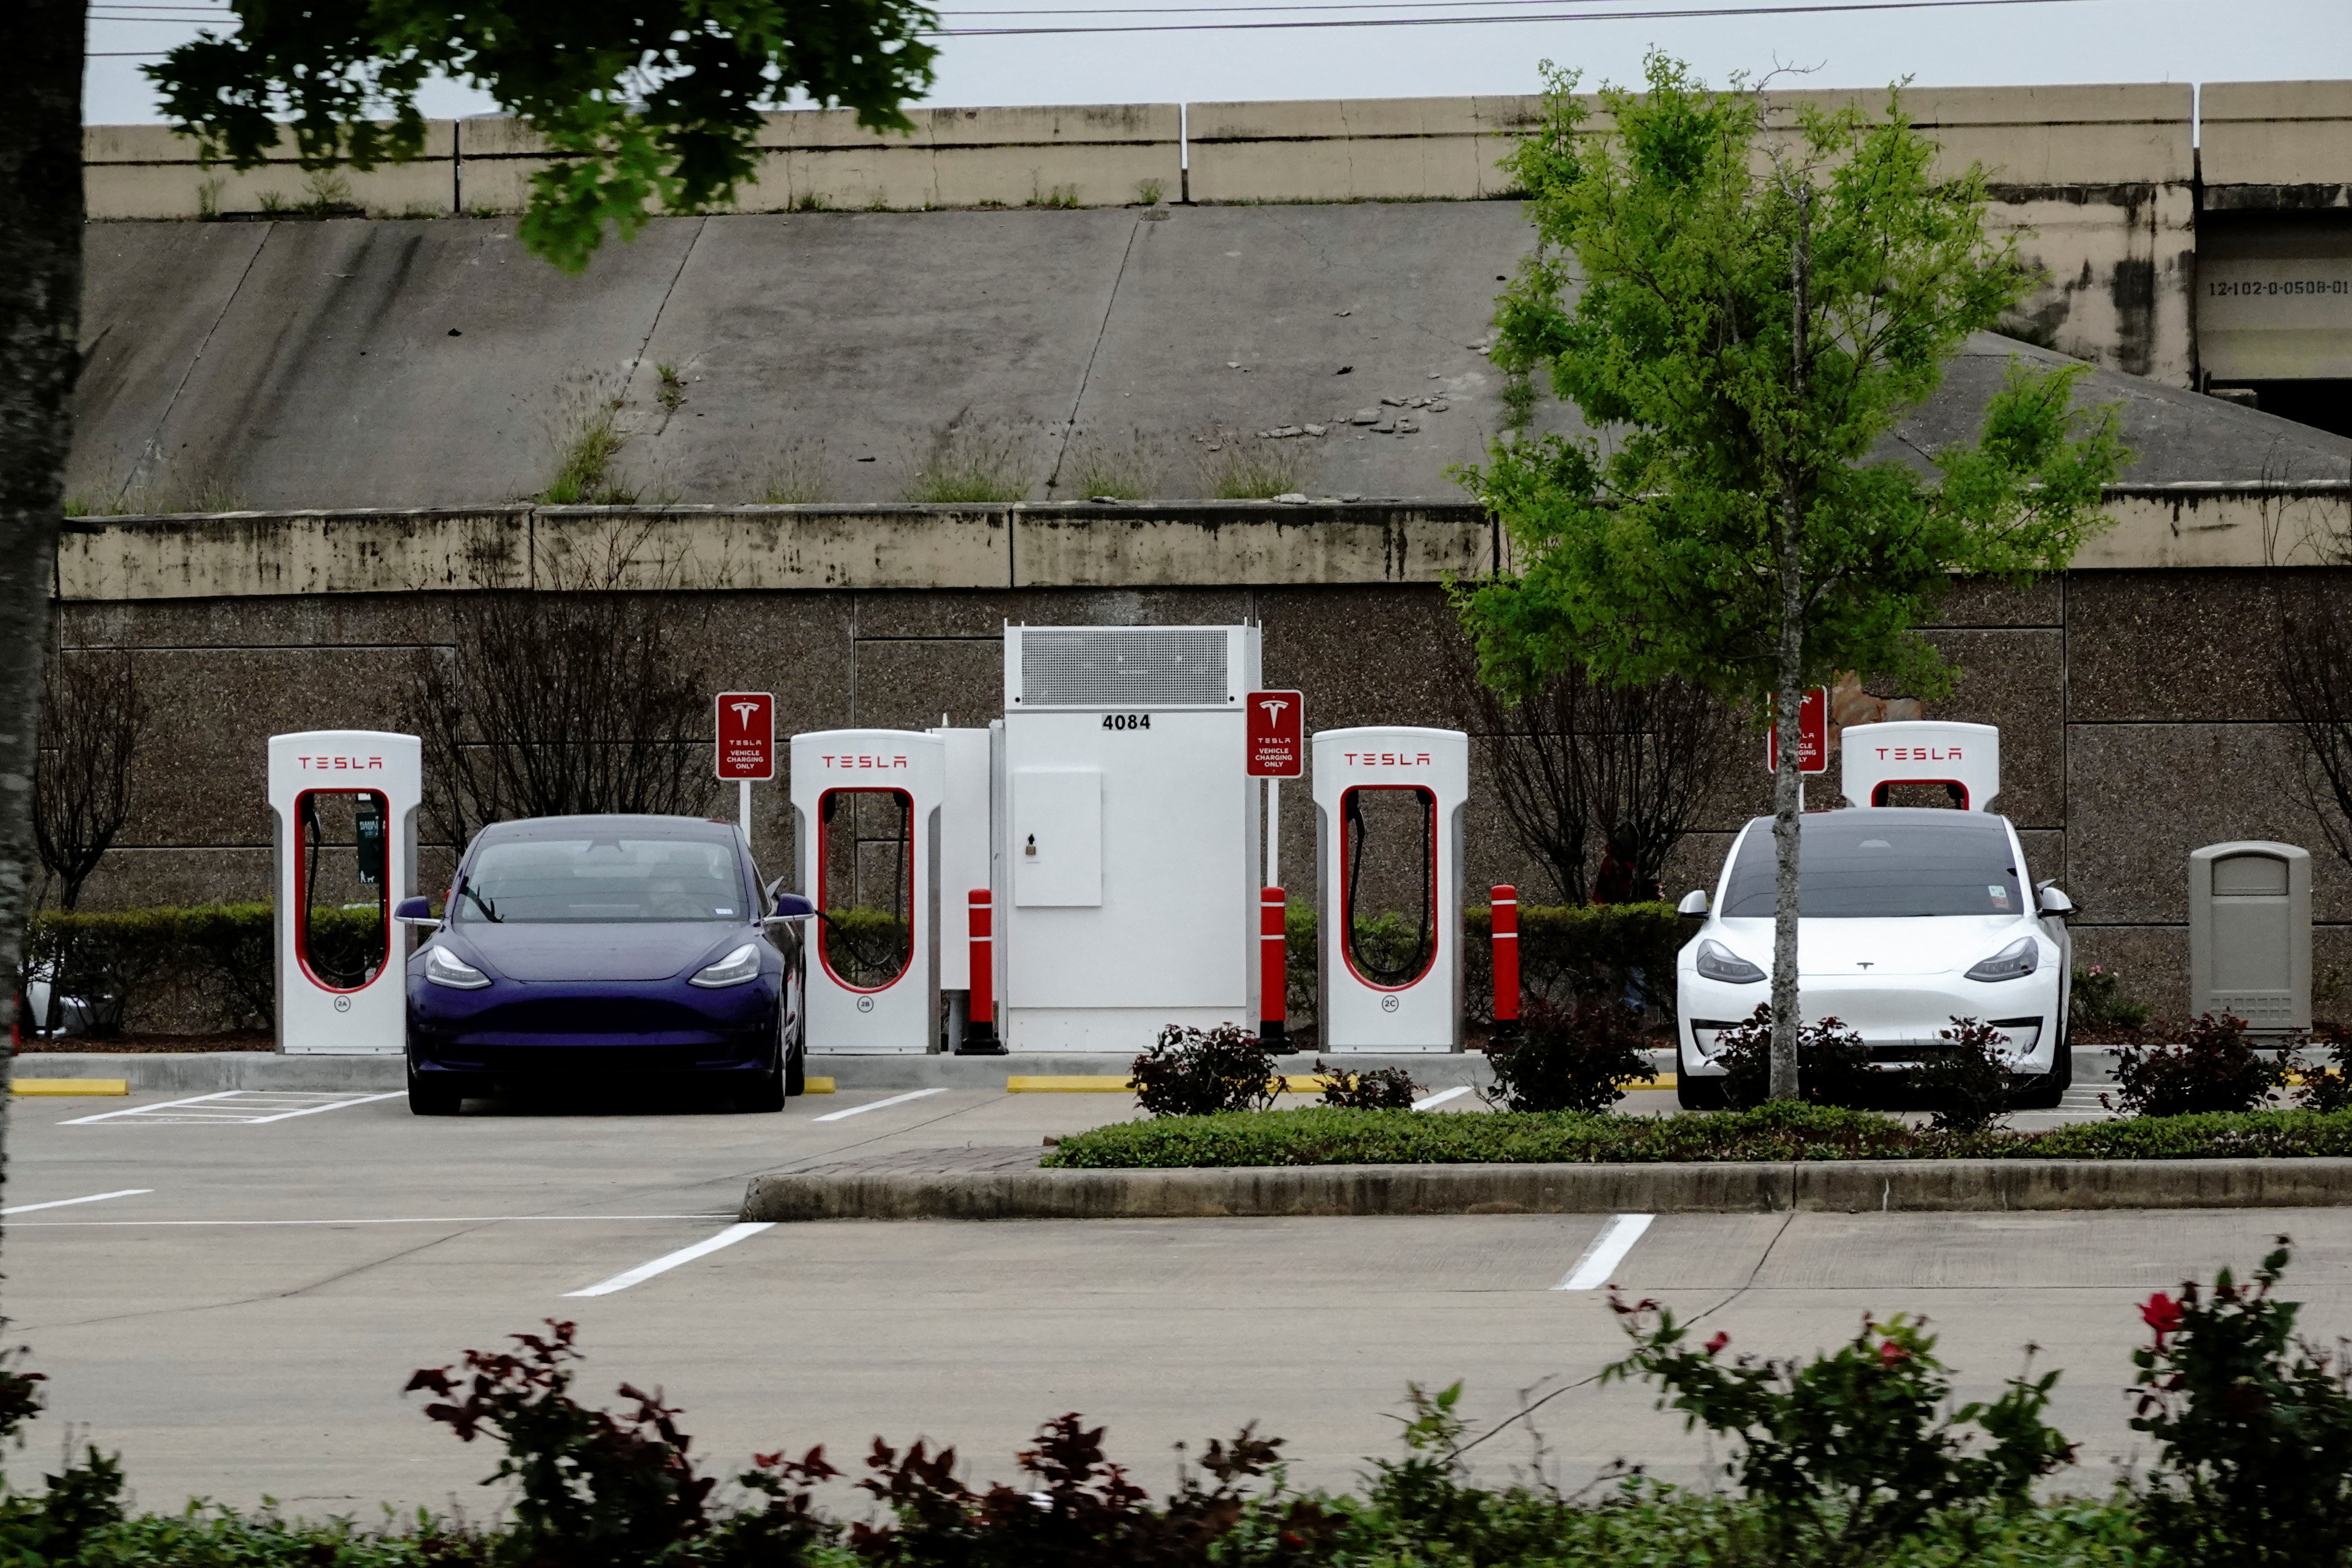 Tesla electric vehicles (EVs) fast-charge using Tesla Superchargers at a Buc-ee’s travel center and gas station in Baytown, Texas